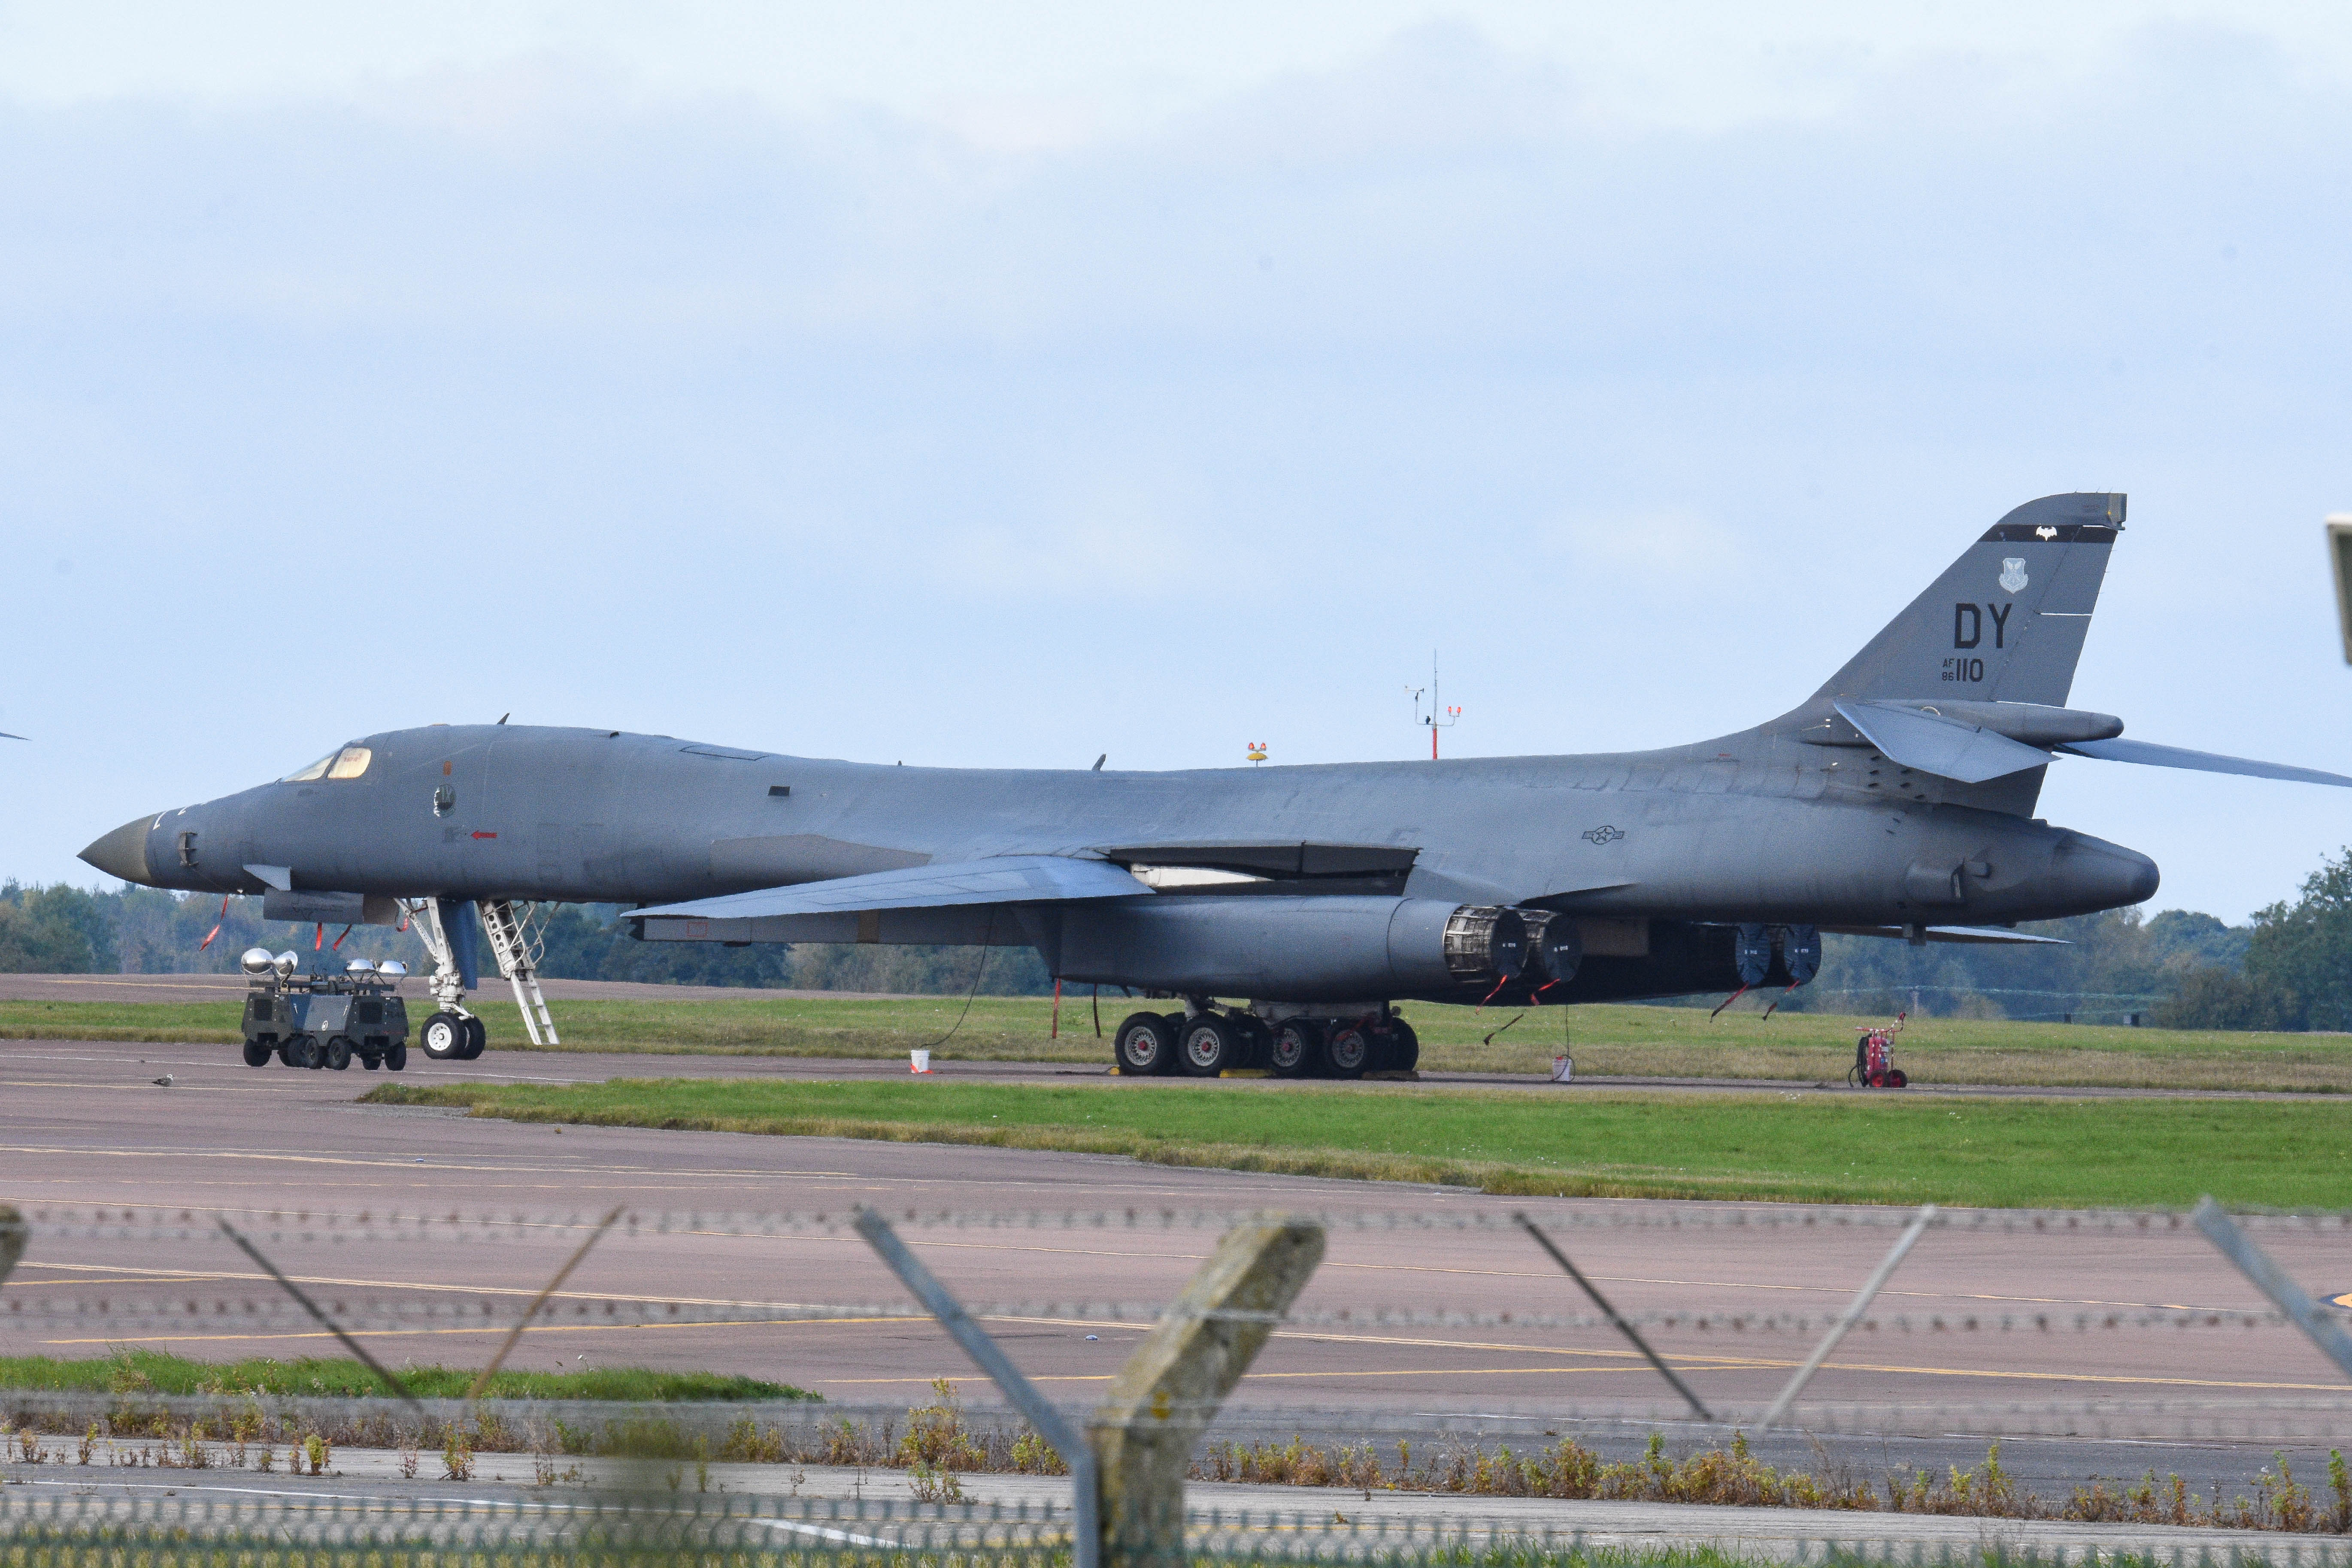 86-0110/860110 USAF - United States Air Force Rockwell B-1B Lancer Photo by colinw - AVSpotters.com